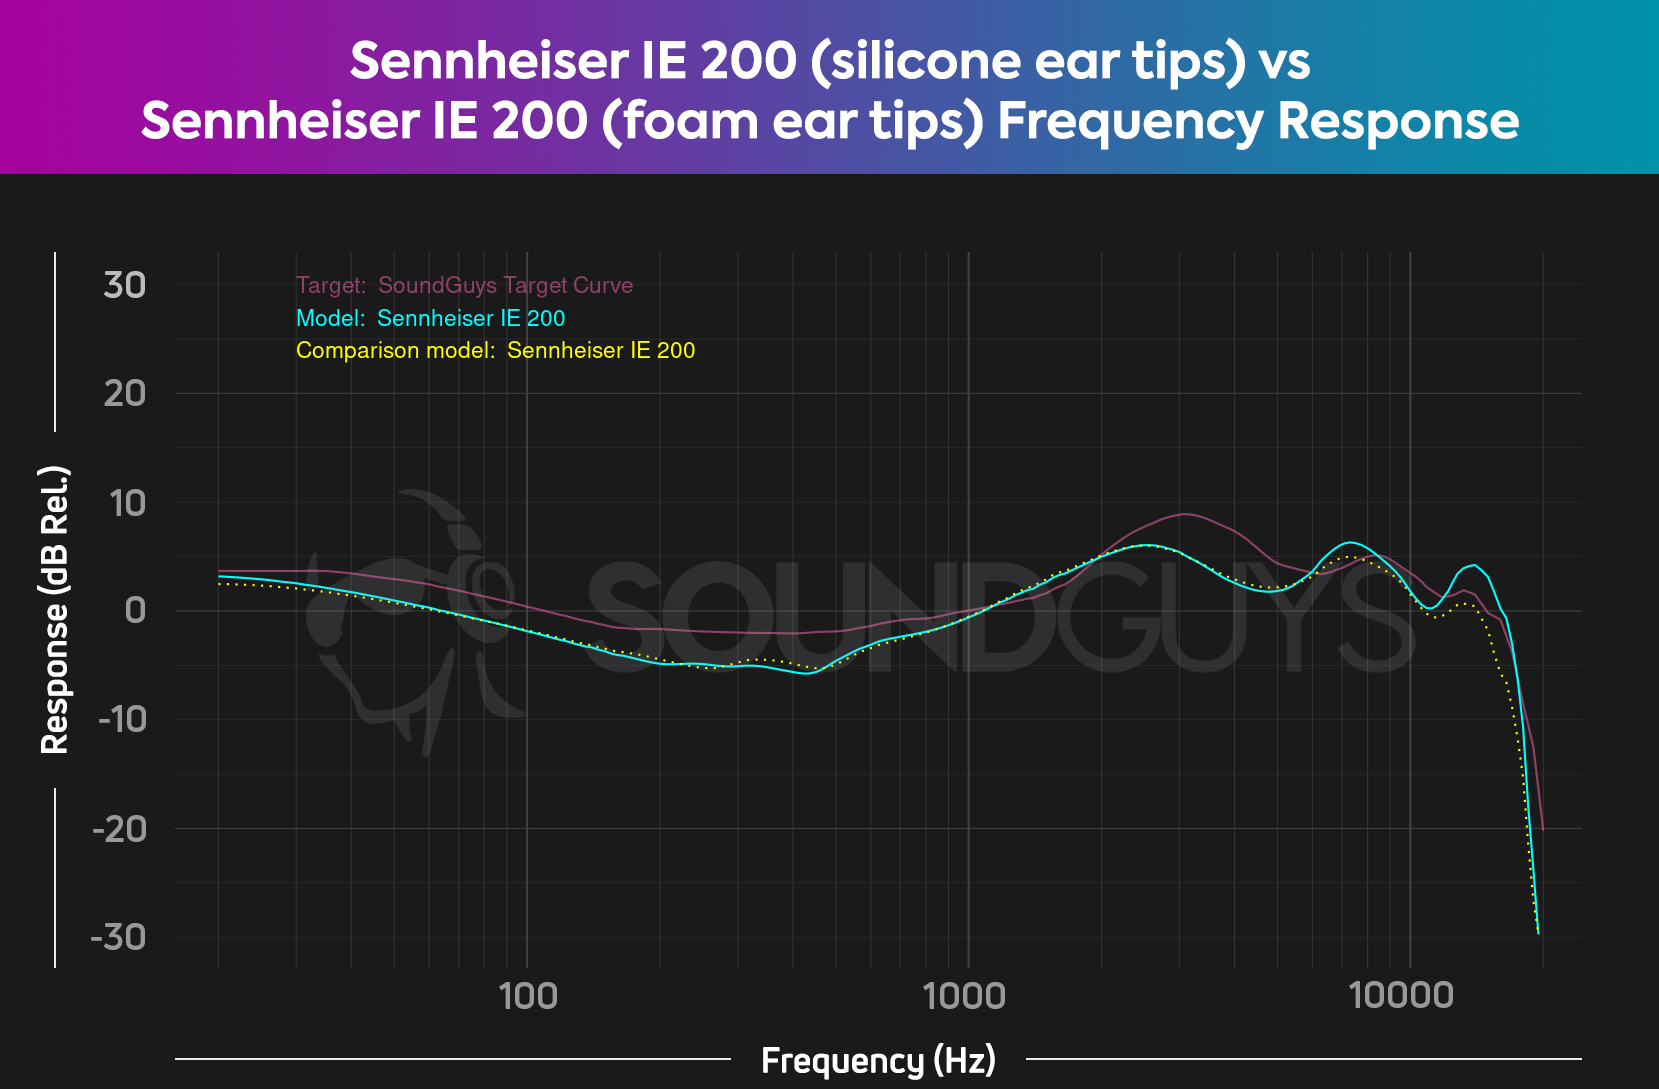 A frequency response chart comparing the Sennheiser IE 200 with silicone ear tips against the same model with foam ear tips.